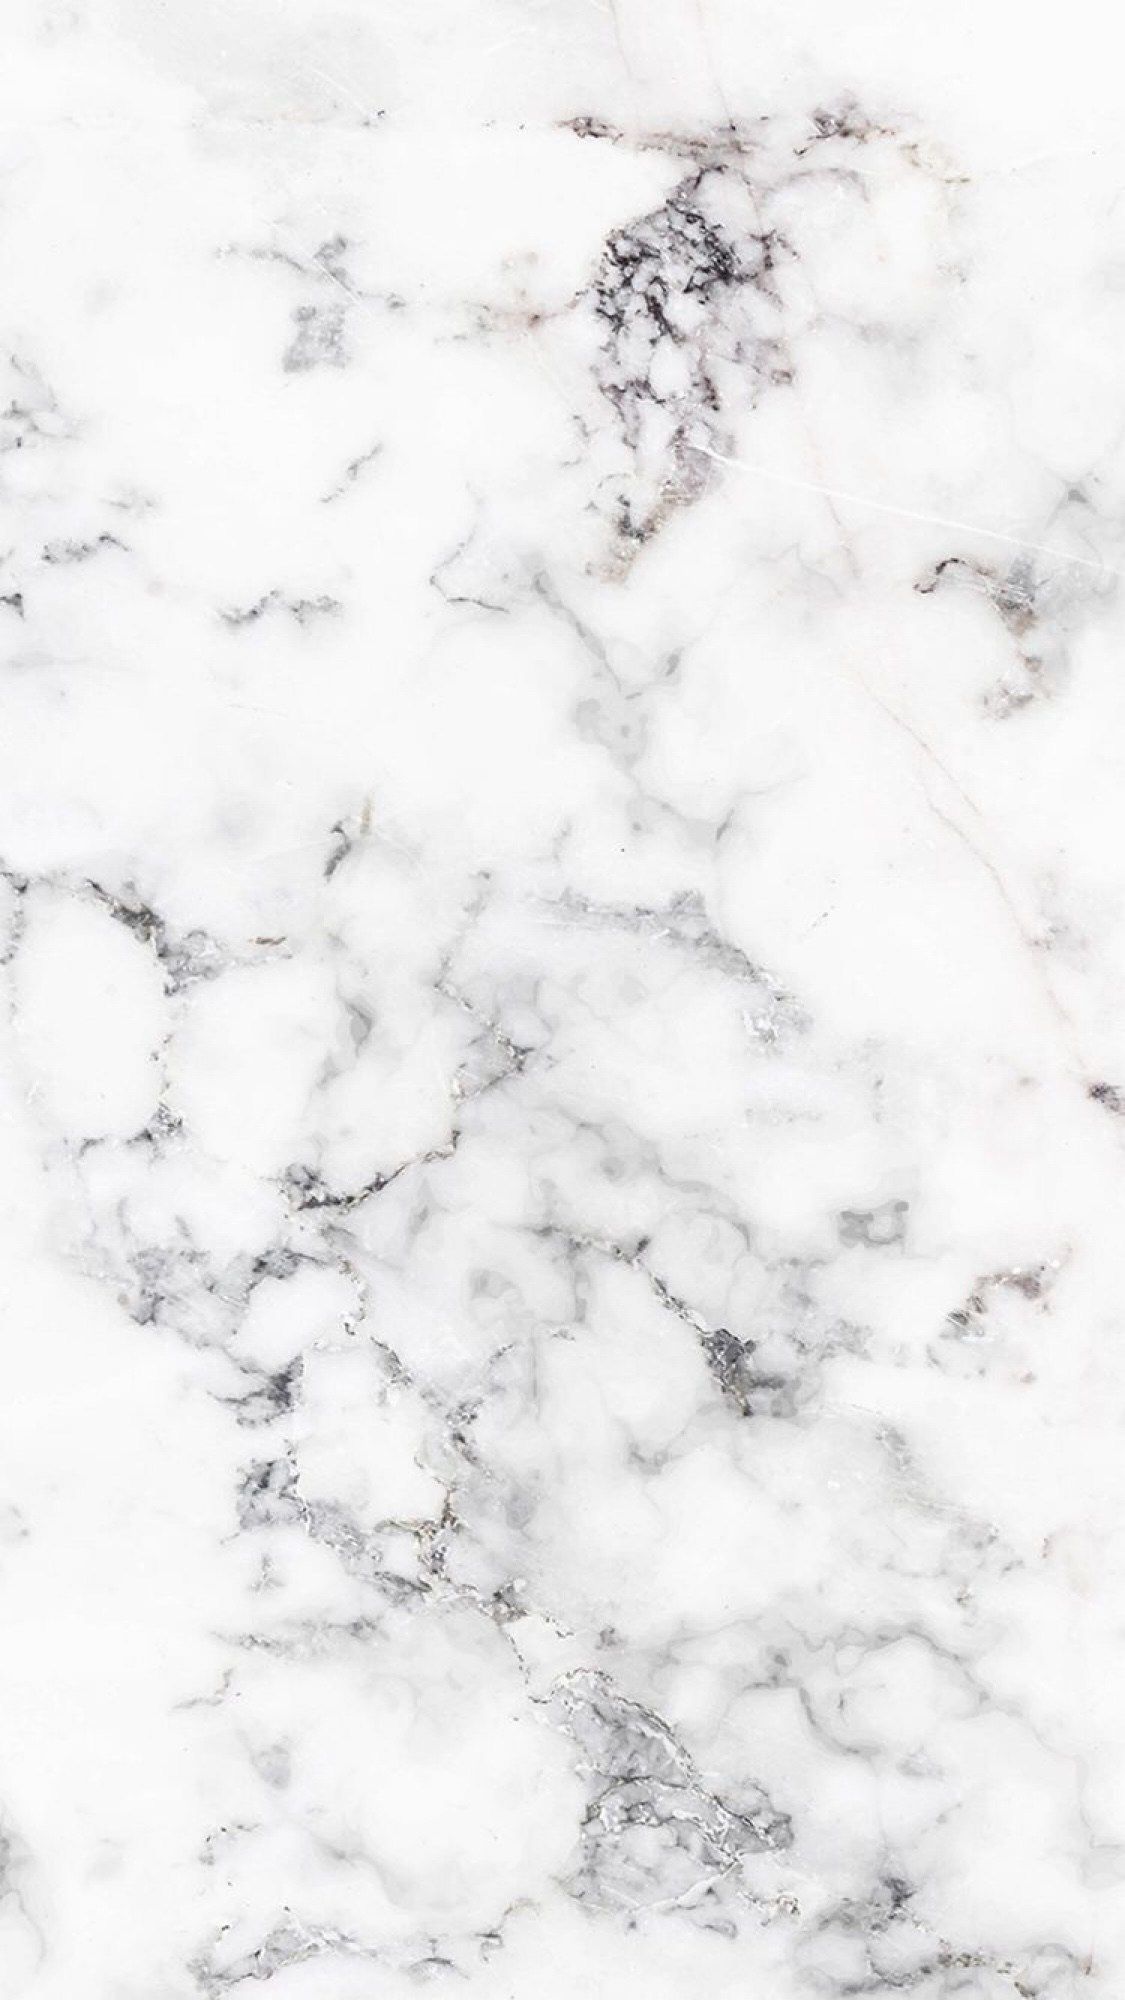 IPhone Wallpaper. White, Monochrome, Black And White, Marble